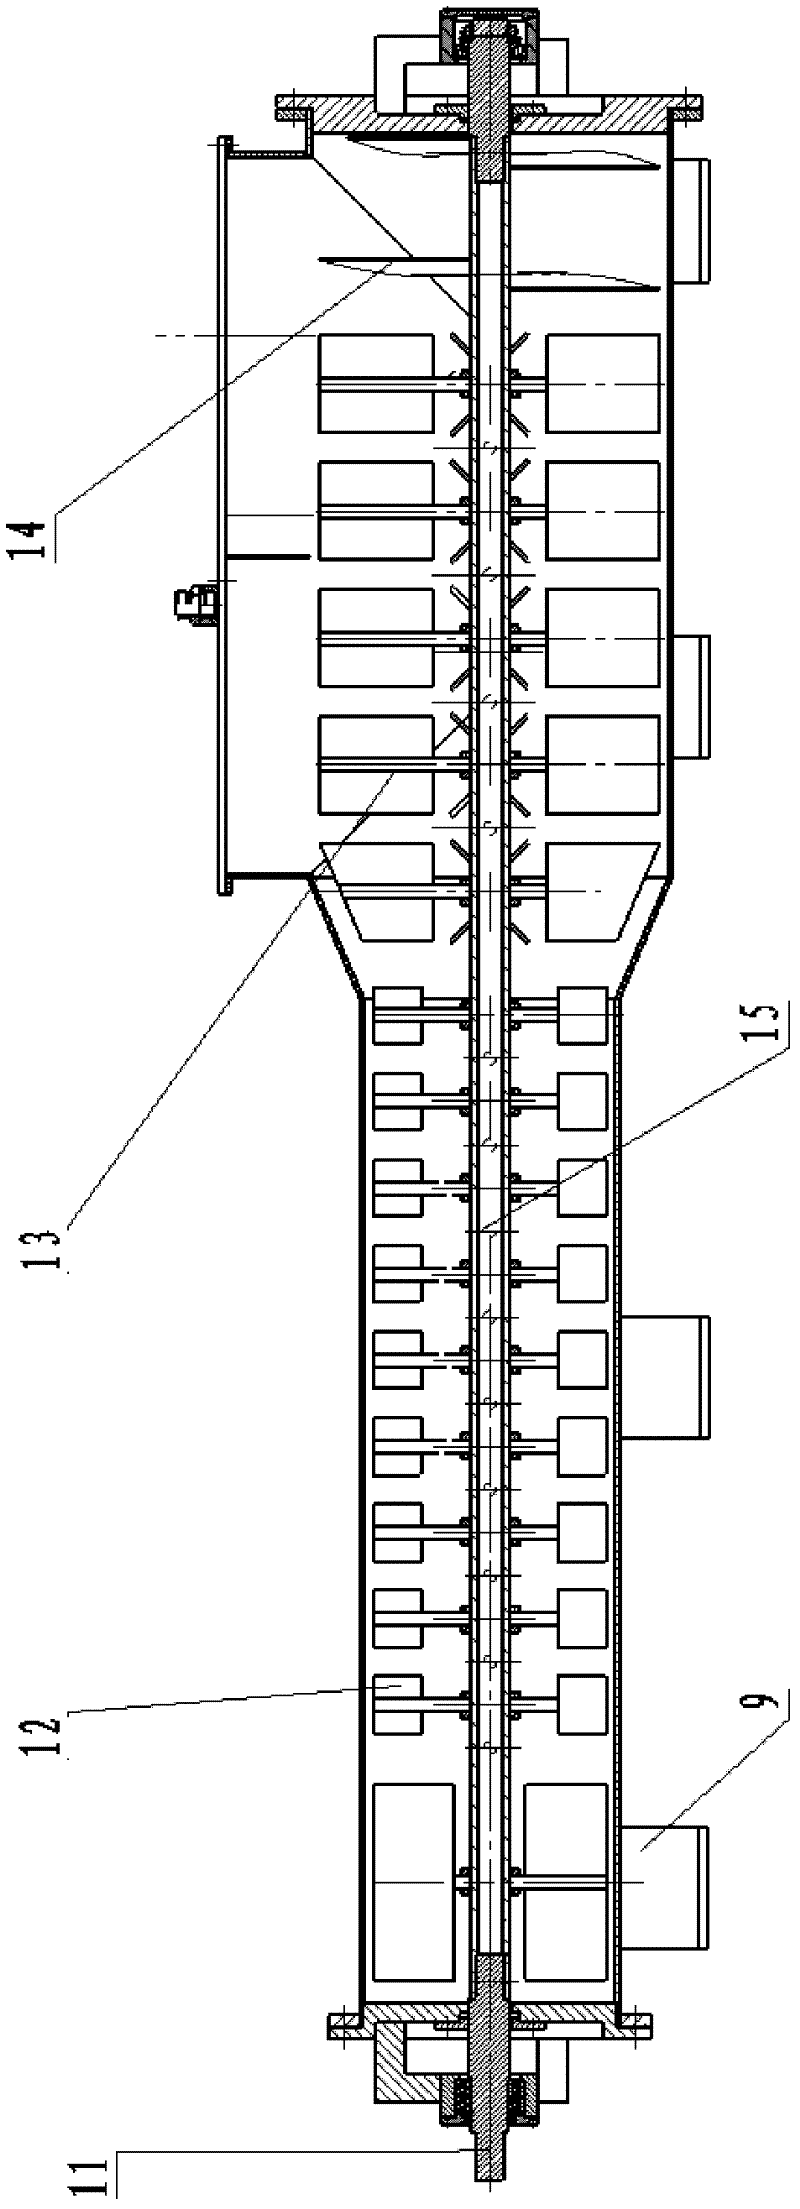 On-line production method and device of composite foamed slurry